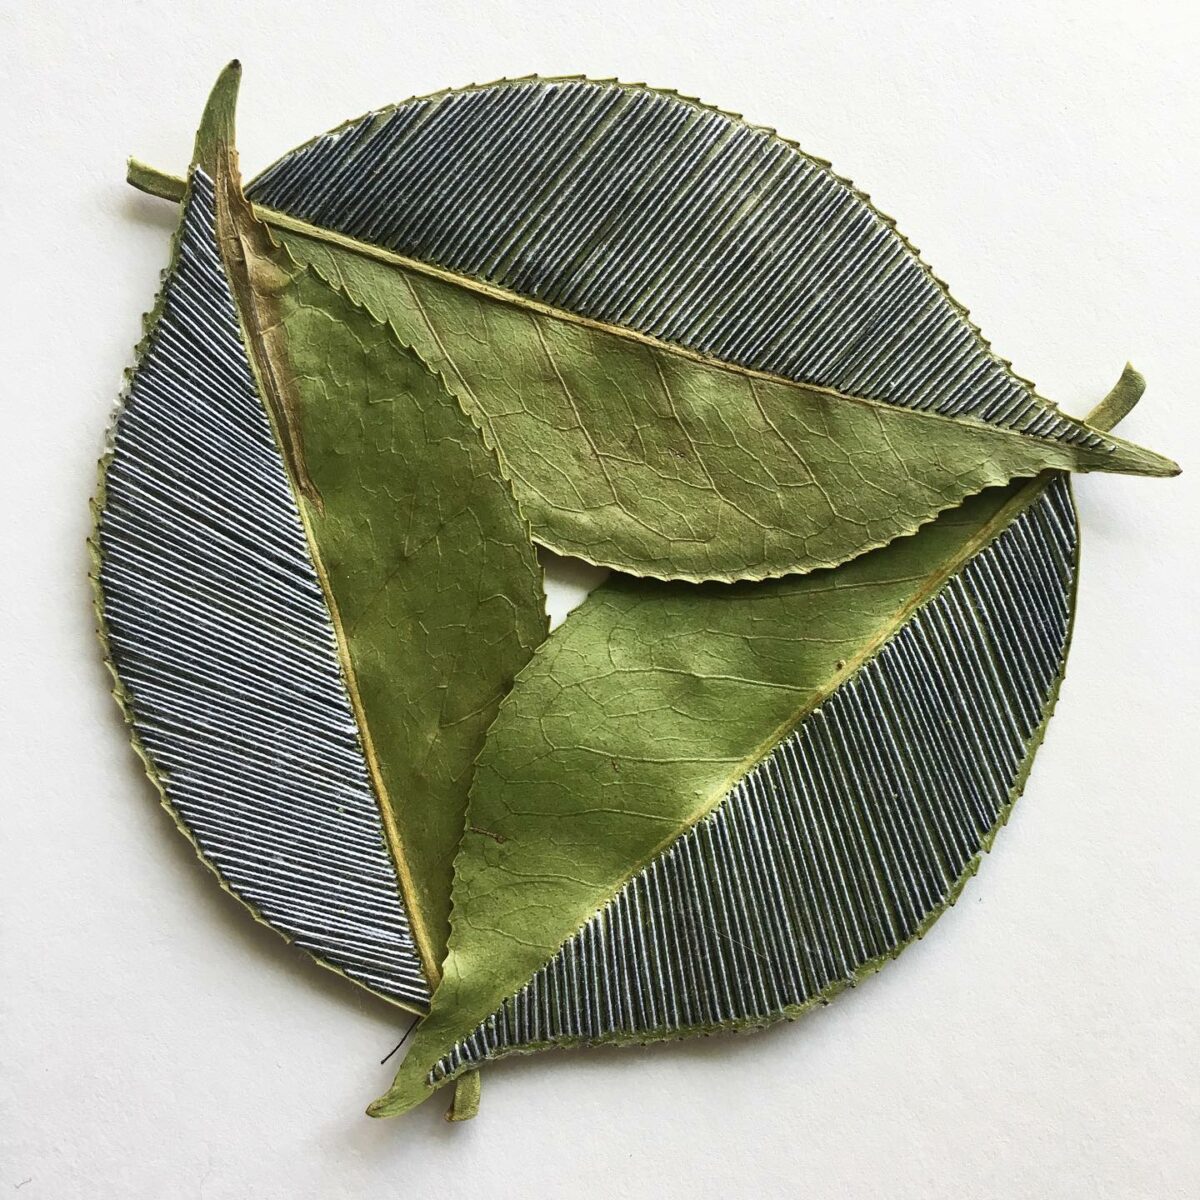 The Fascinating Embroidered Leaf Art Of Hillary Waters Fayle (19)